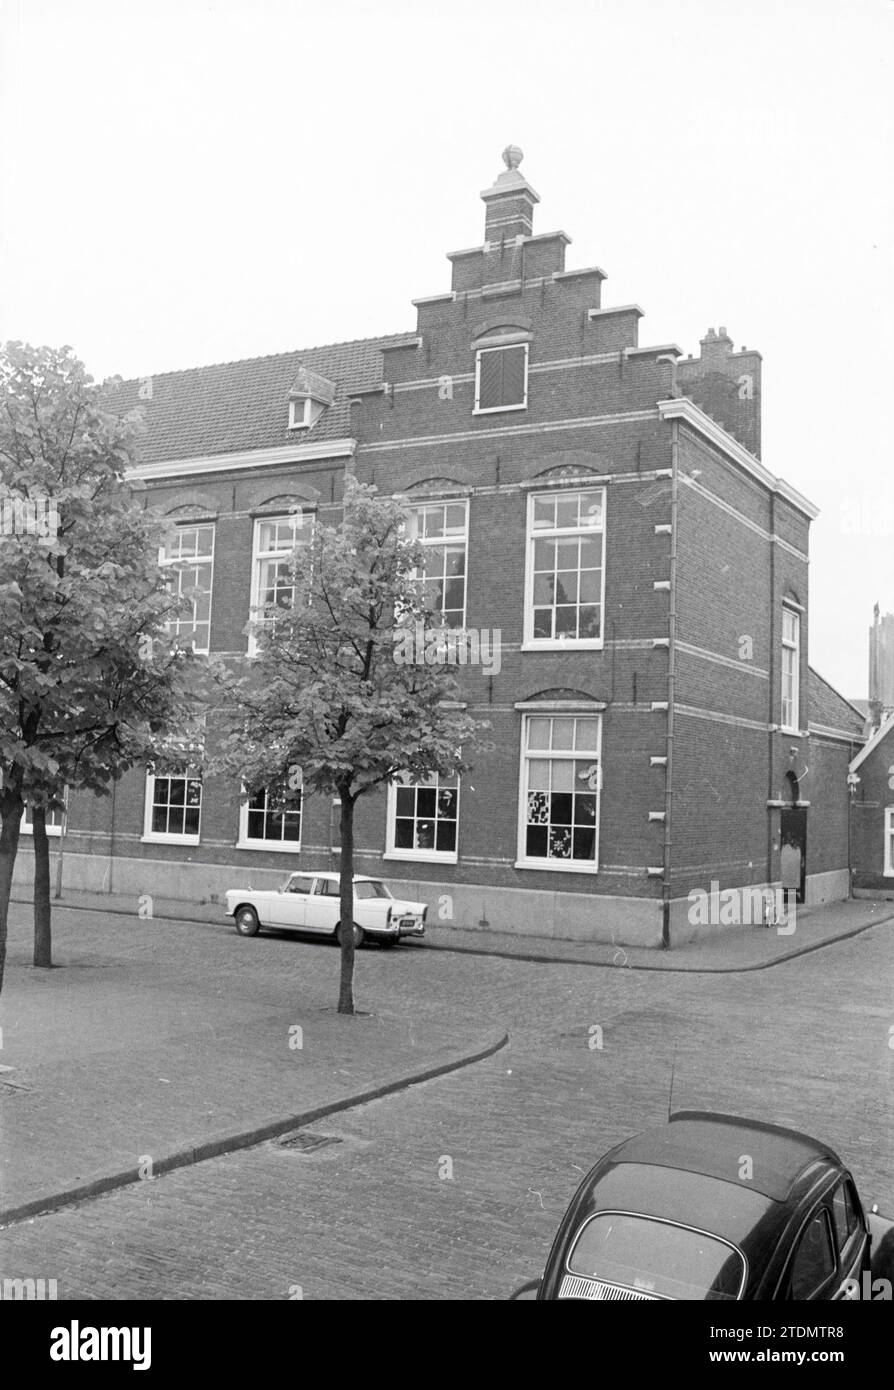 Ext. youth center De Til, Exterior, 07-06-1971, Whizgle News from the Past, Tailored for the Future. Explore historical narratives, Dutch The Netherlands agency image with a modern perspective, bridging the gap between yesterday's events and tomorrow's insights. A timeless journey shaping the stories that shape our future Stock Photo